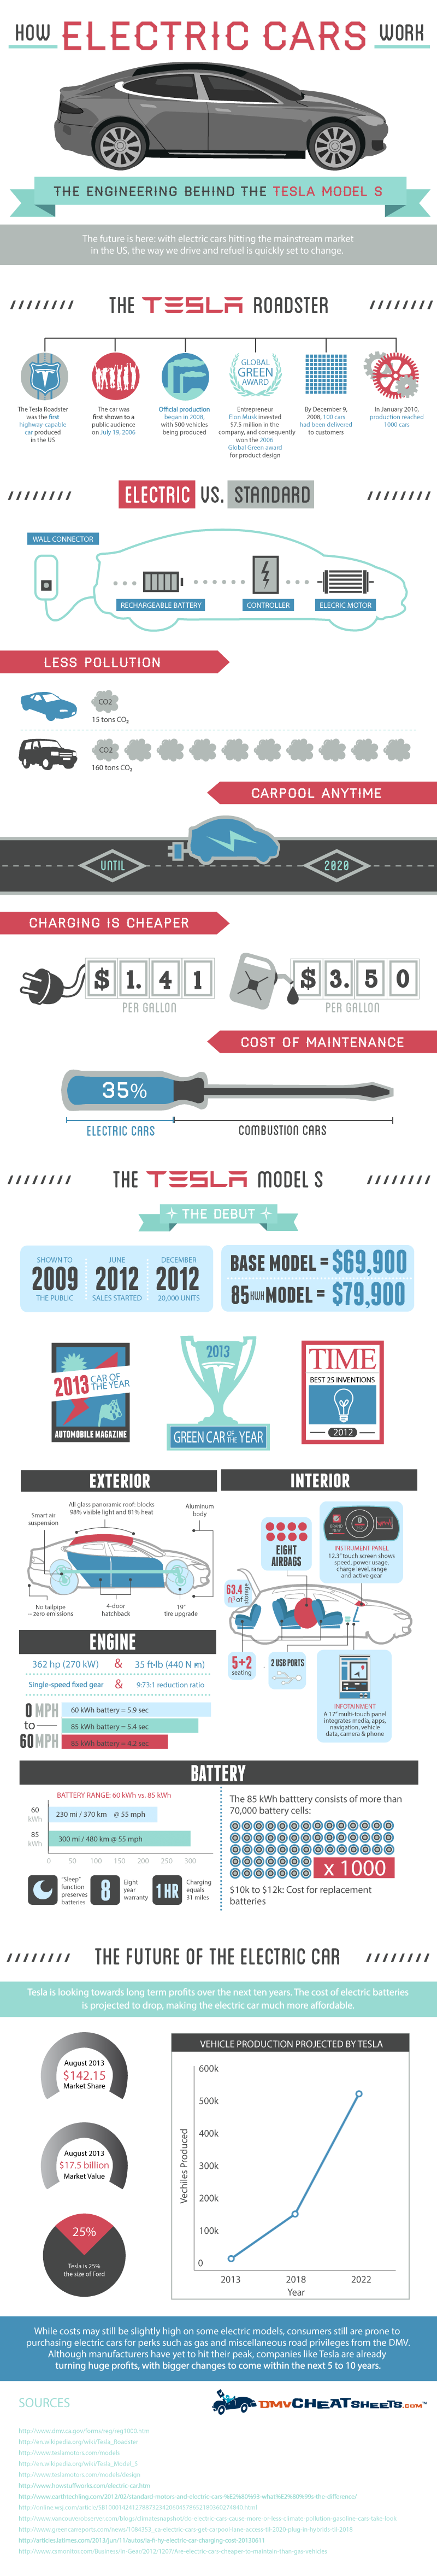 How Electric Cars (and the Tesla Model S) Work